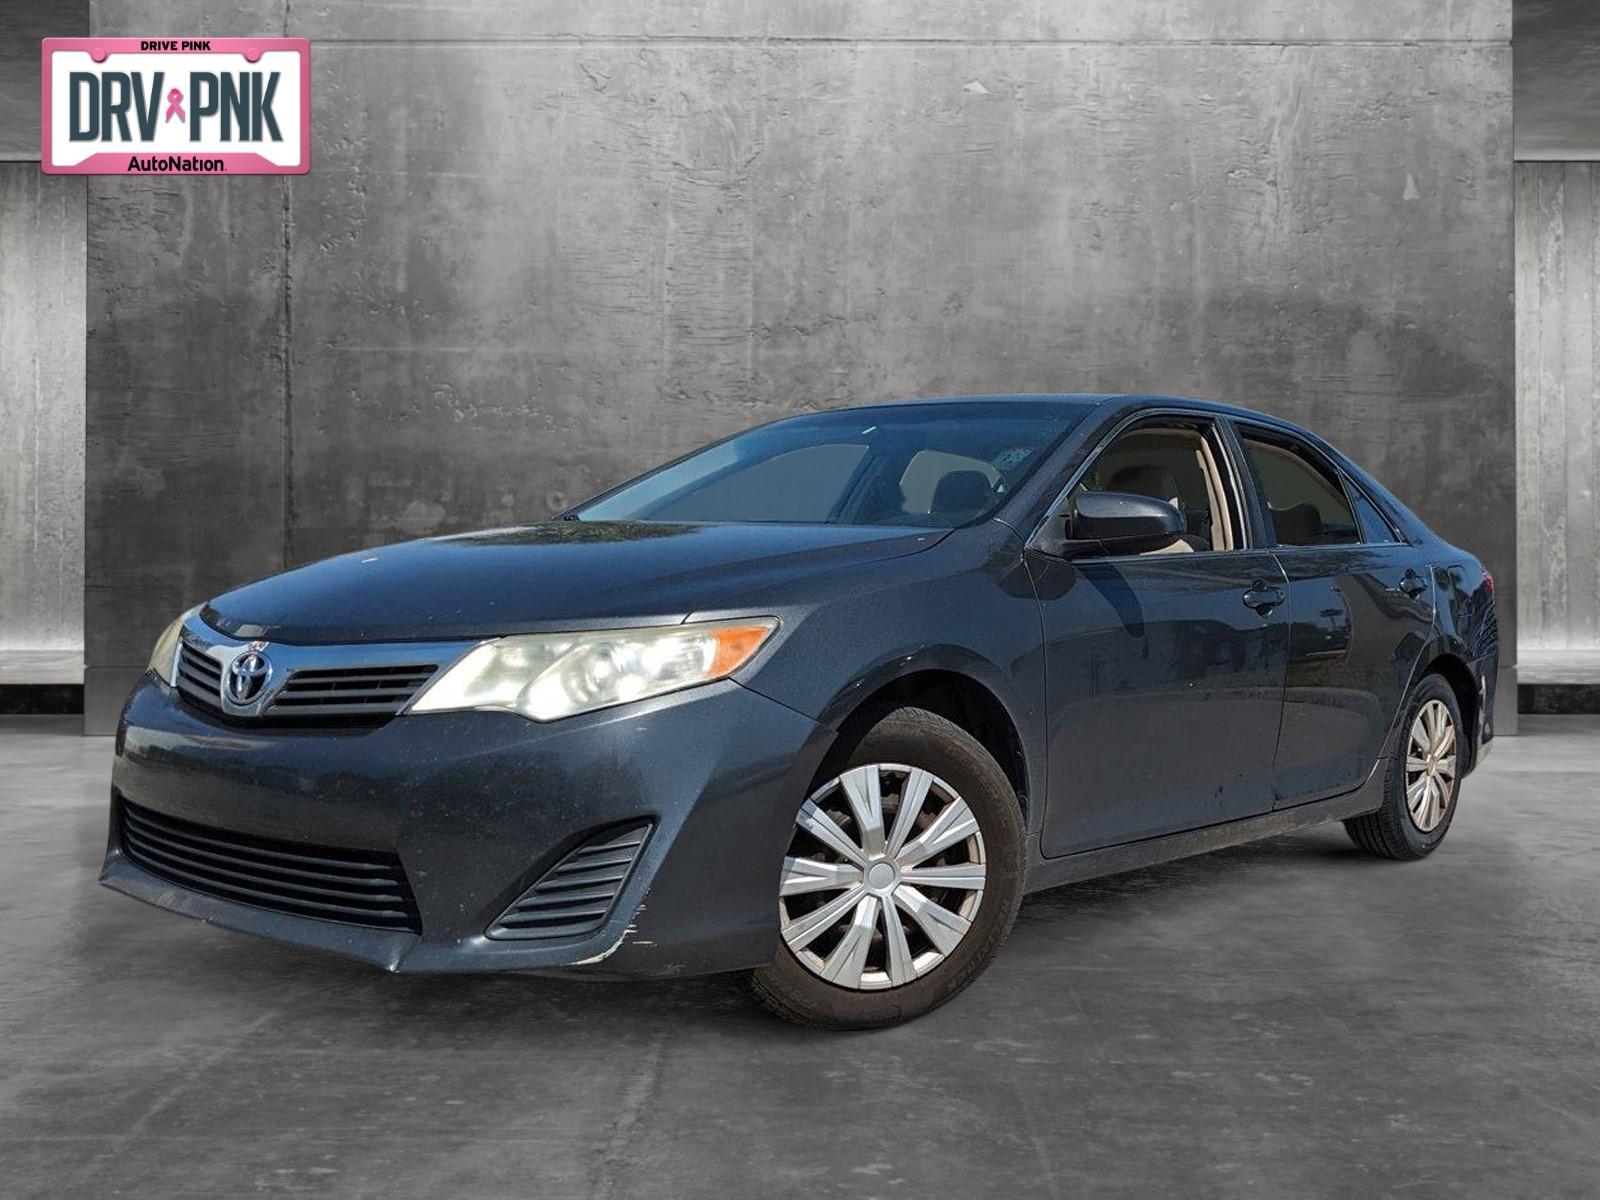 2012 Toyota Camry Vehicle Photo in Winter Park, FL 32792